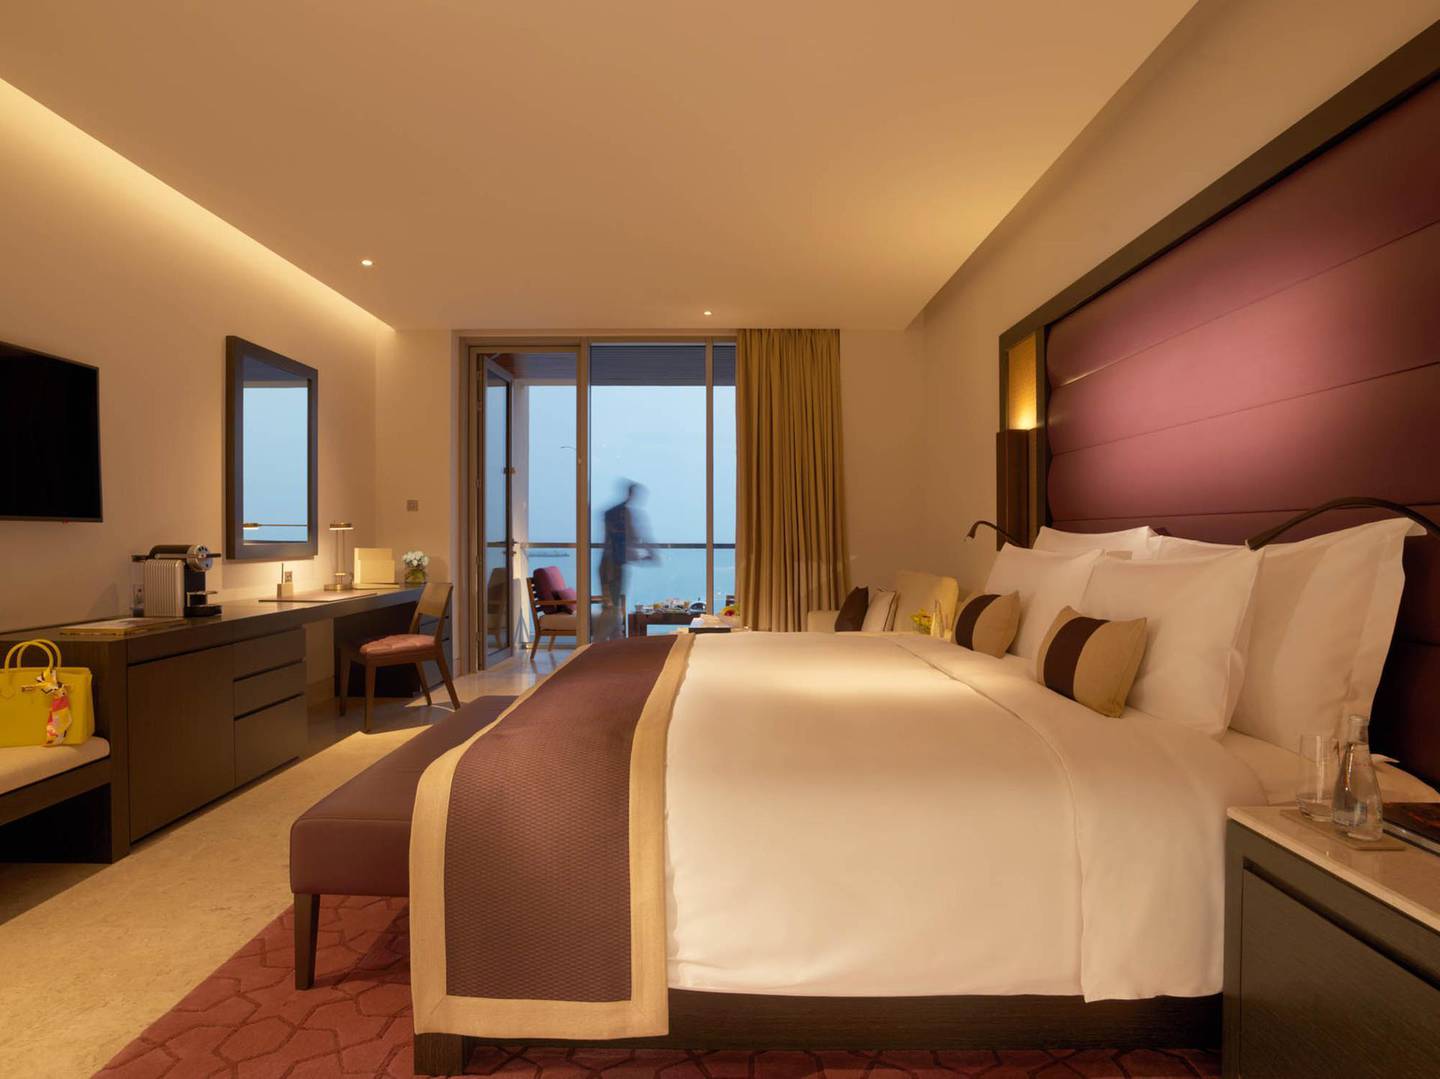 Deluxe Sea View Room at Kempinski Hotel Muscat. Courtesy Kempinski Hotel Muscat